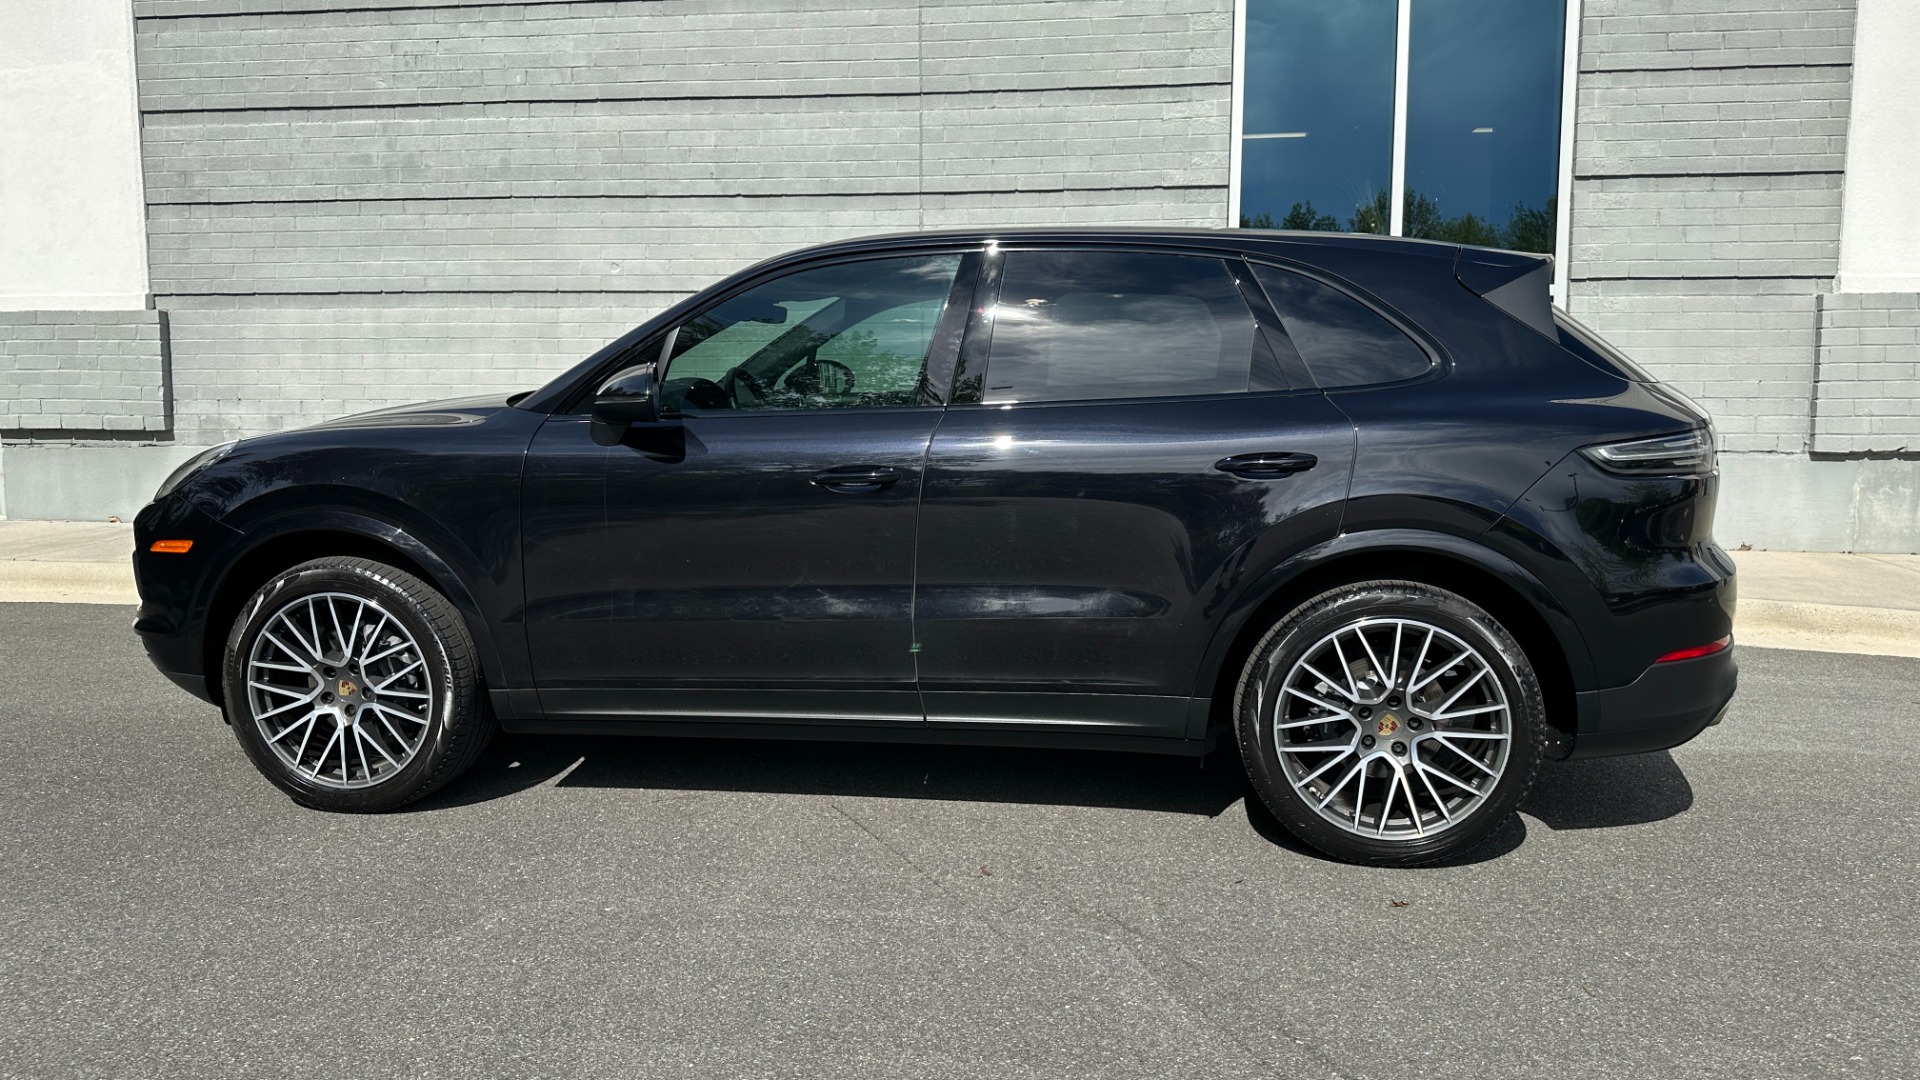 Used 2019 Porsche Cayenne AWD / PREMIUM / TOWING PKG / BOSE AUDIO / GLOSS BLACK TRIM for sale $54,995 at Formula Imports in Charlotte NC 28227 6